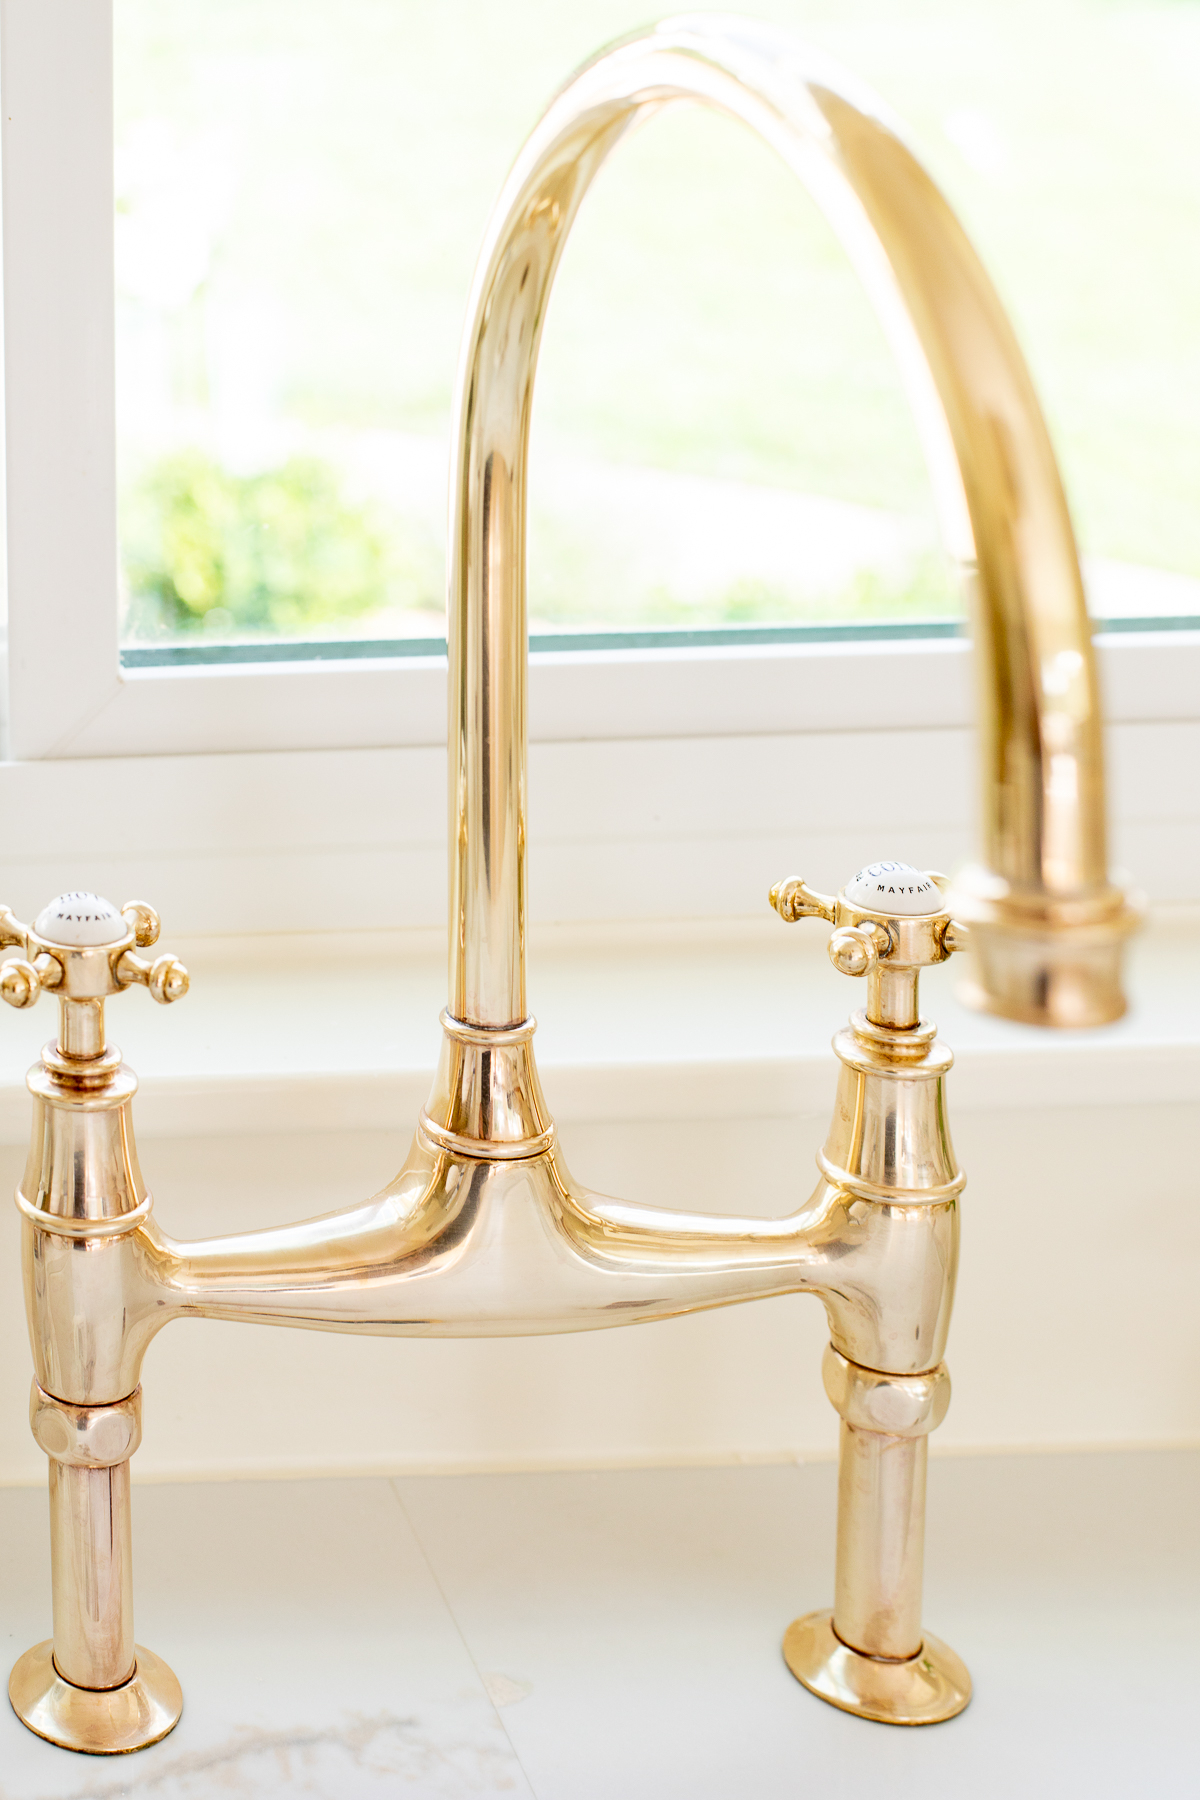 An unlacquered brass kitchen faucet in a white kitchen.